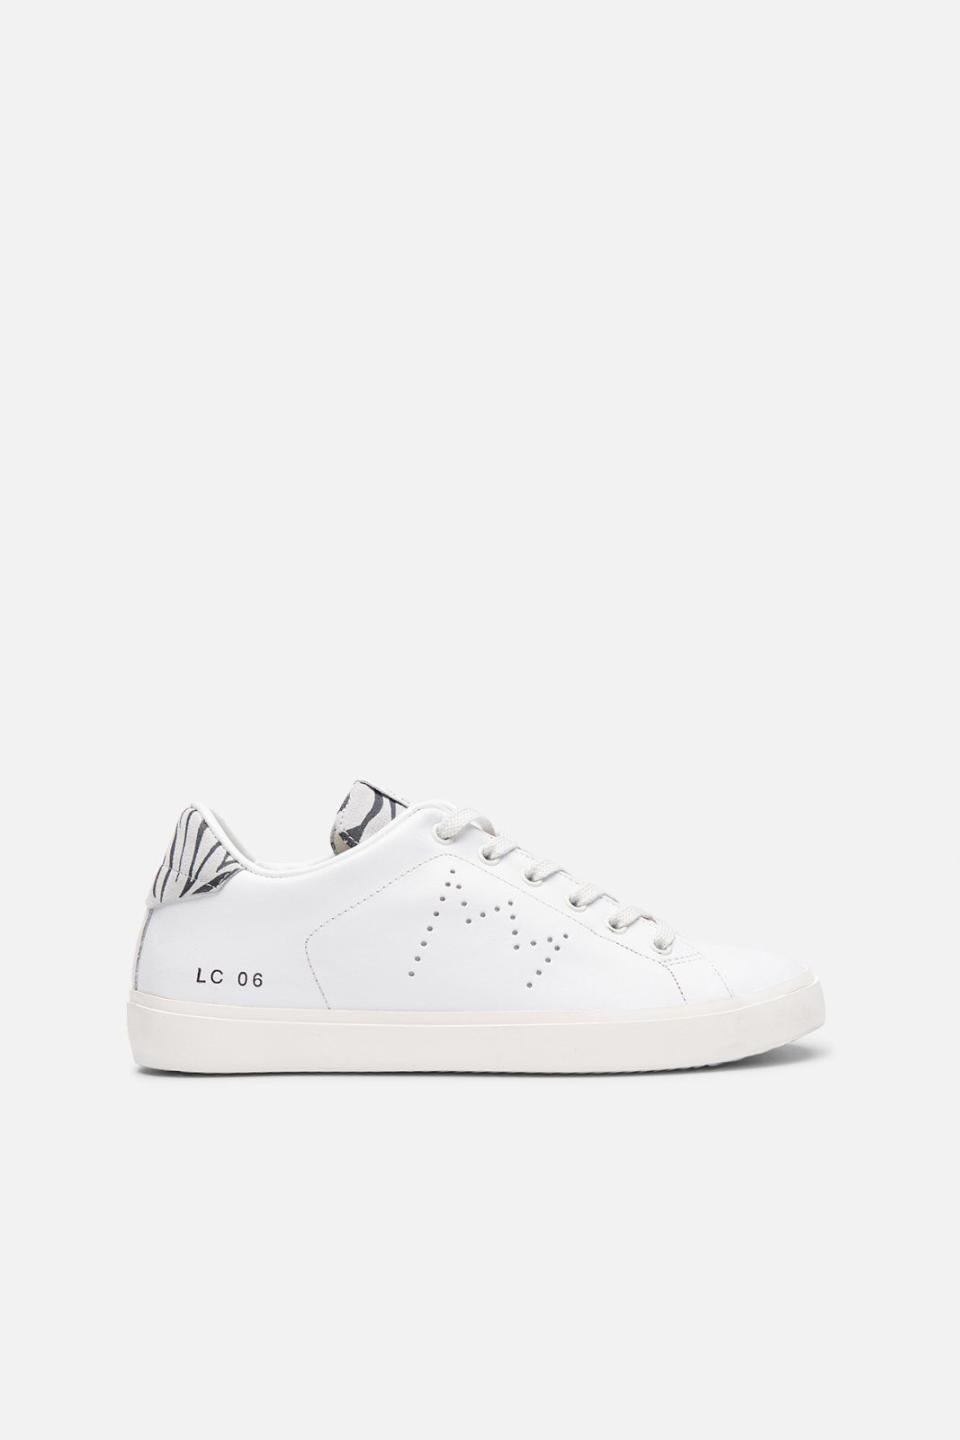 2) Iconic Low Top Sneaker